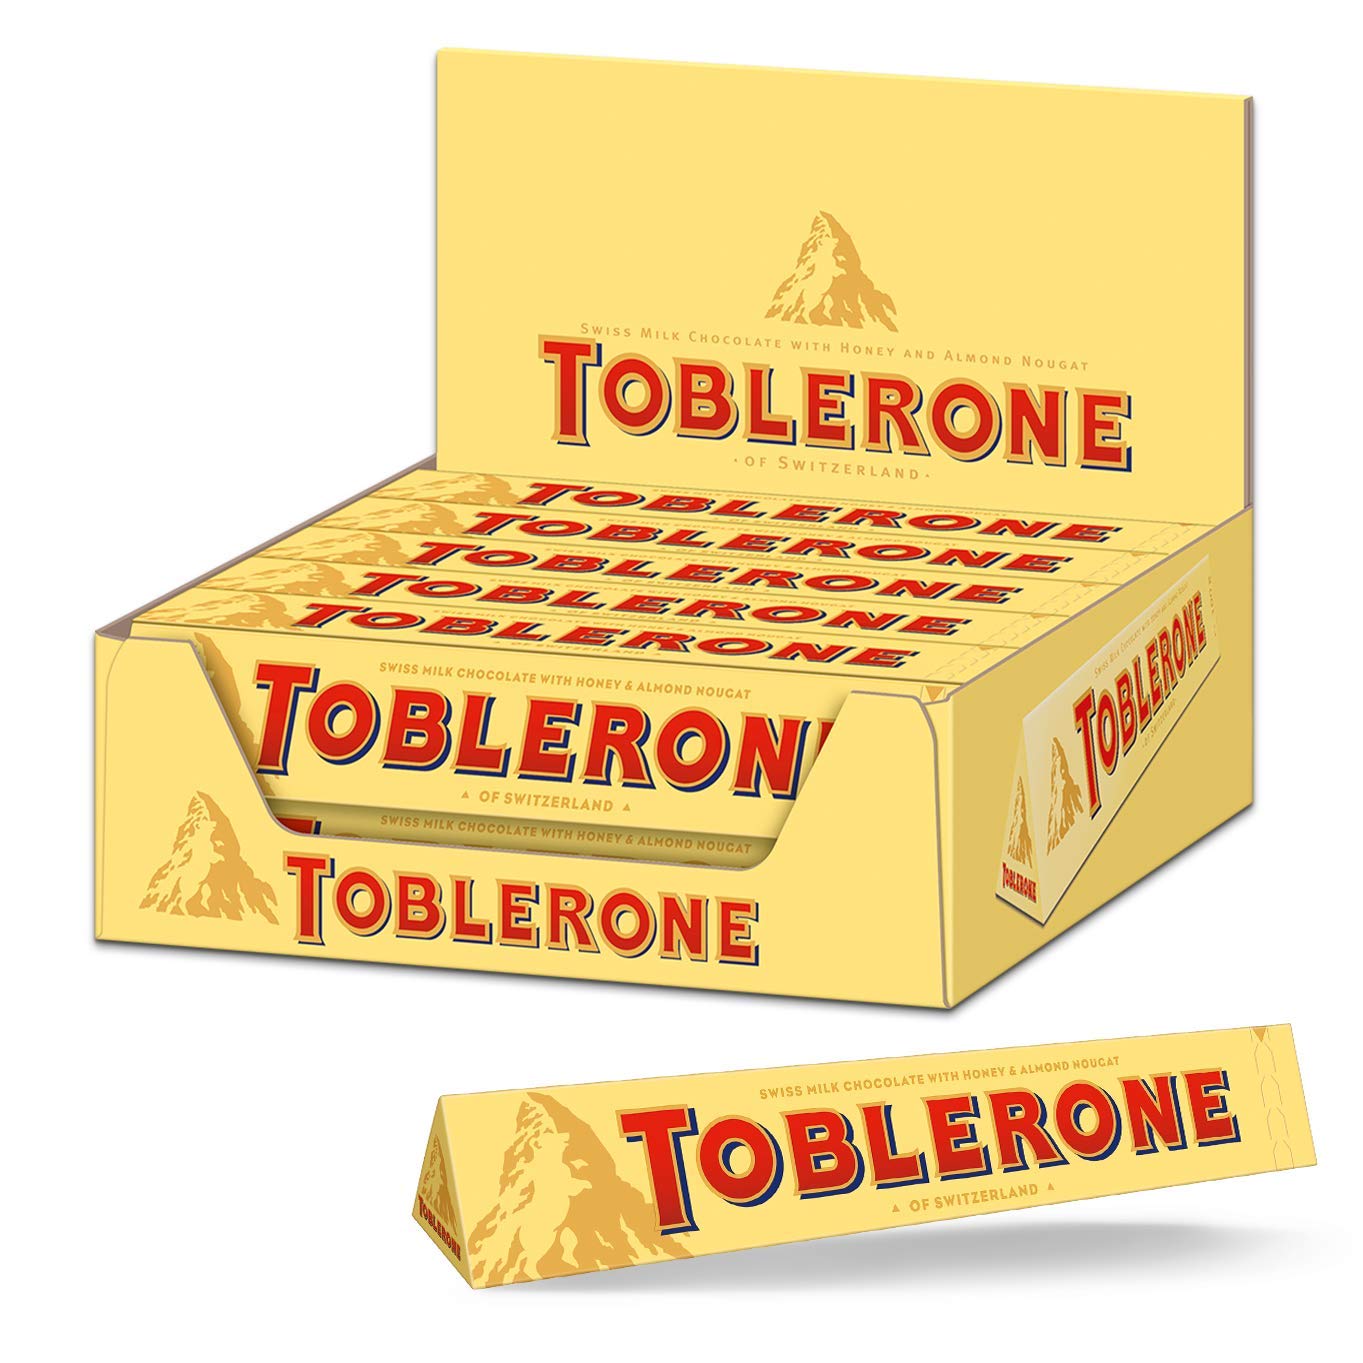 Socola mật ong Toblerone Swiss Milk Chocolate with Honey And Almond Nougat